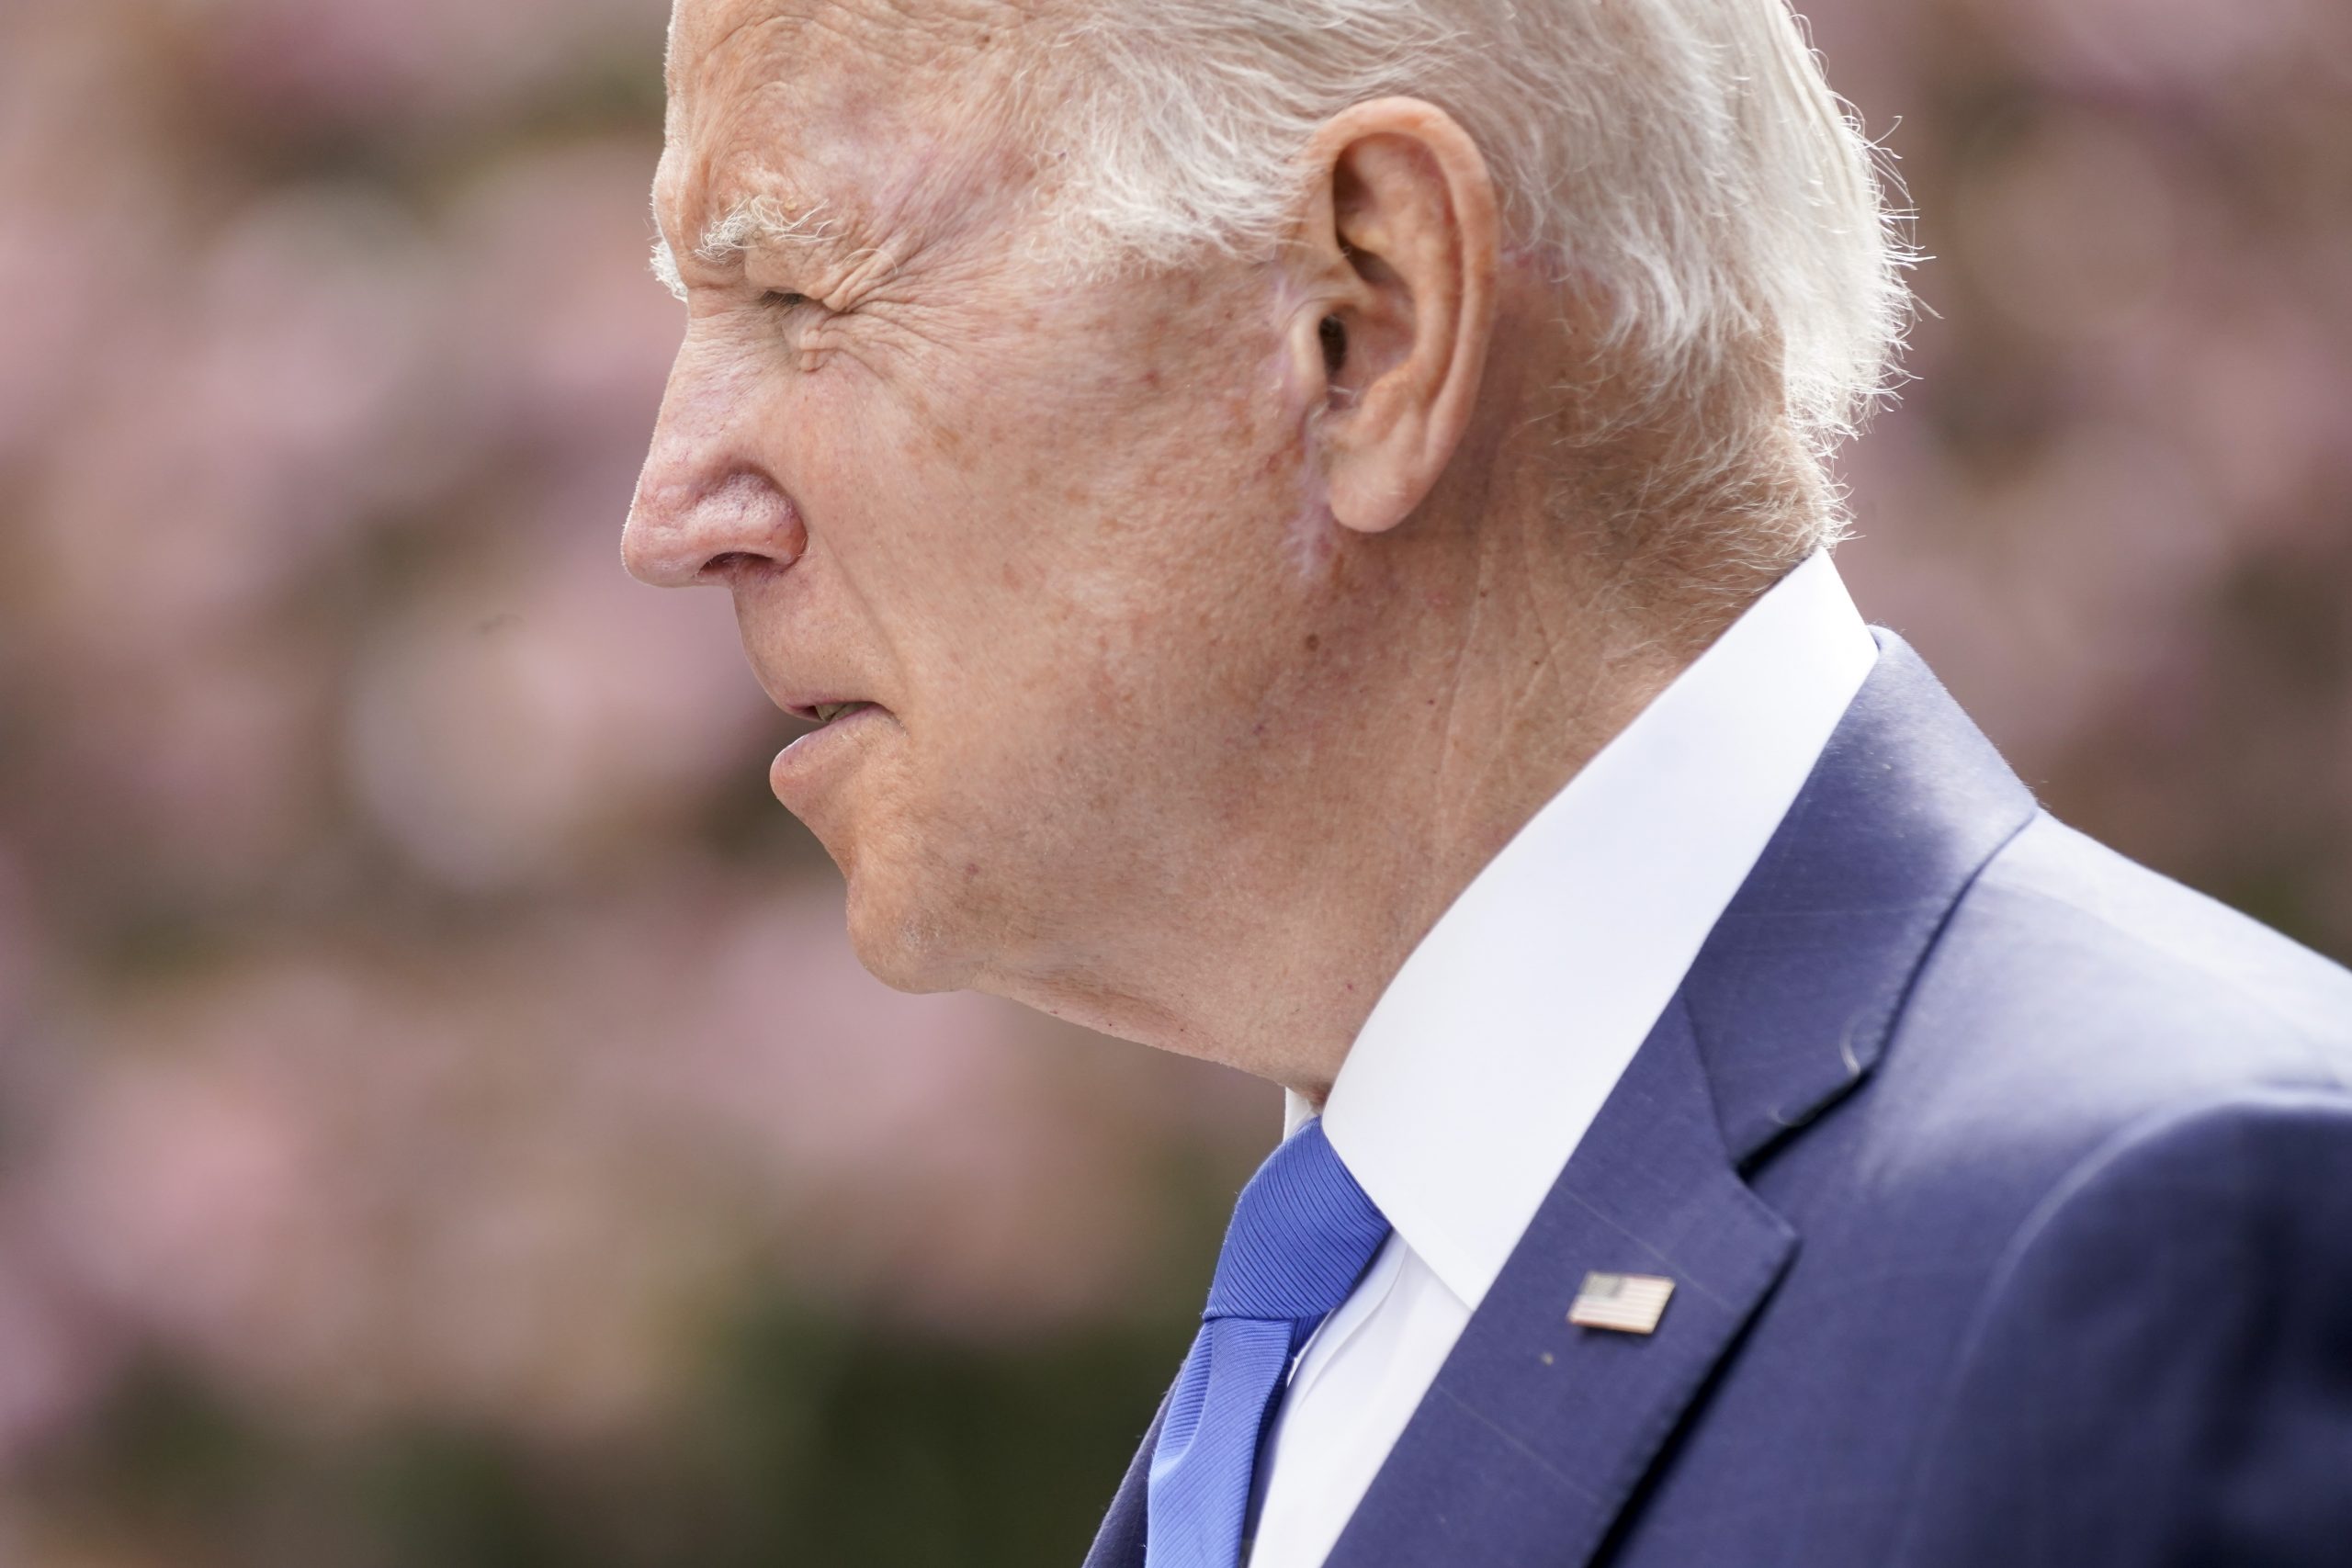 Biden stumbles with suburban women and mothers before midterm elections - Washington Examiner